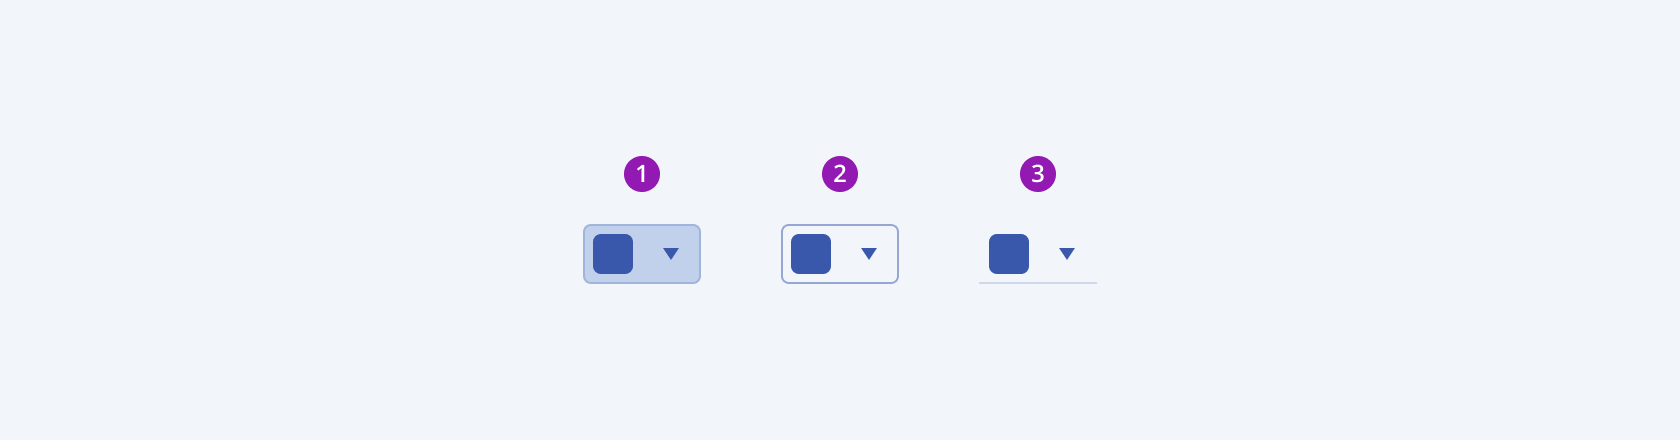 Three Telerik and Kendo UI ColorPicker components demonstrating the default solid, outline, and flat fill modes respectively